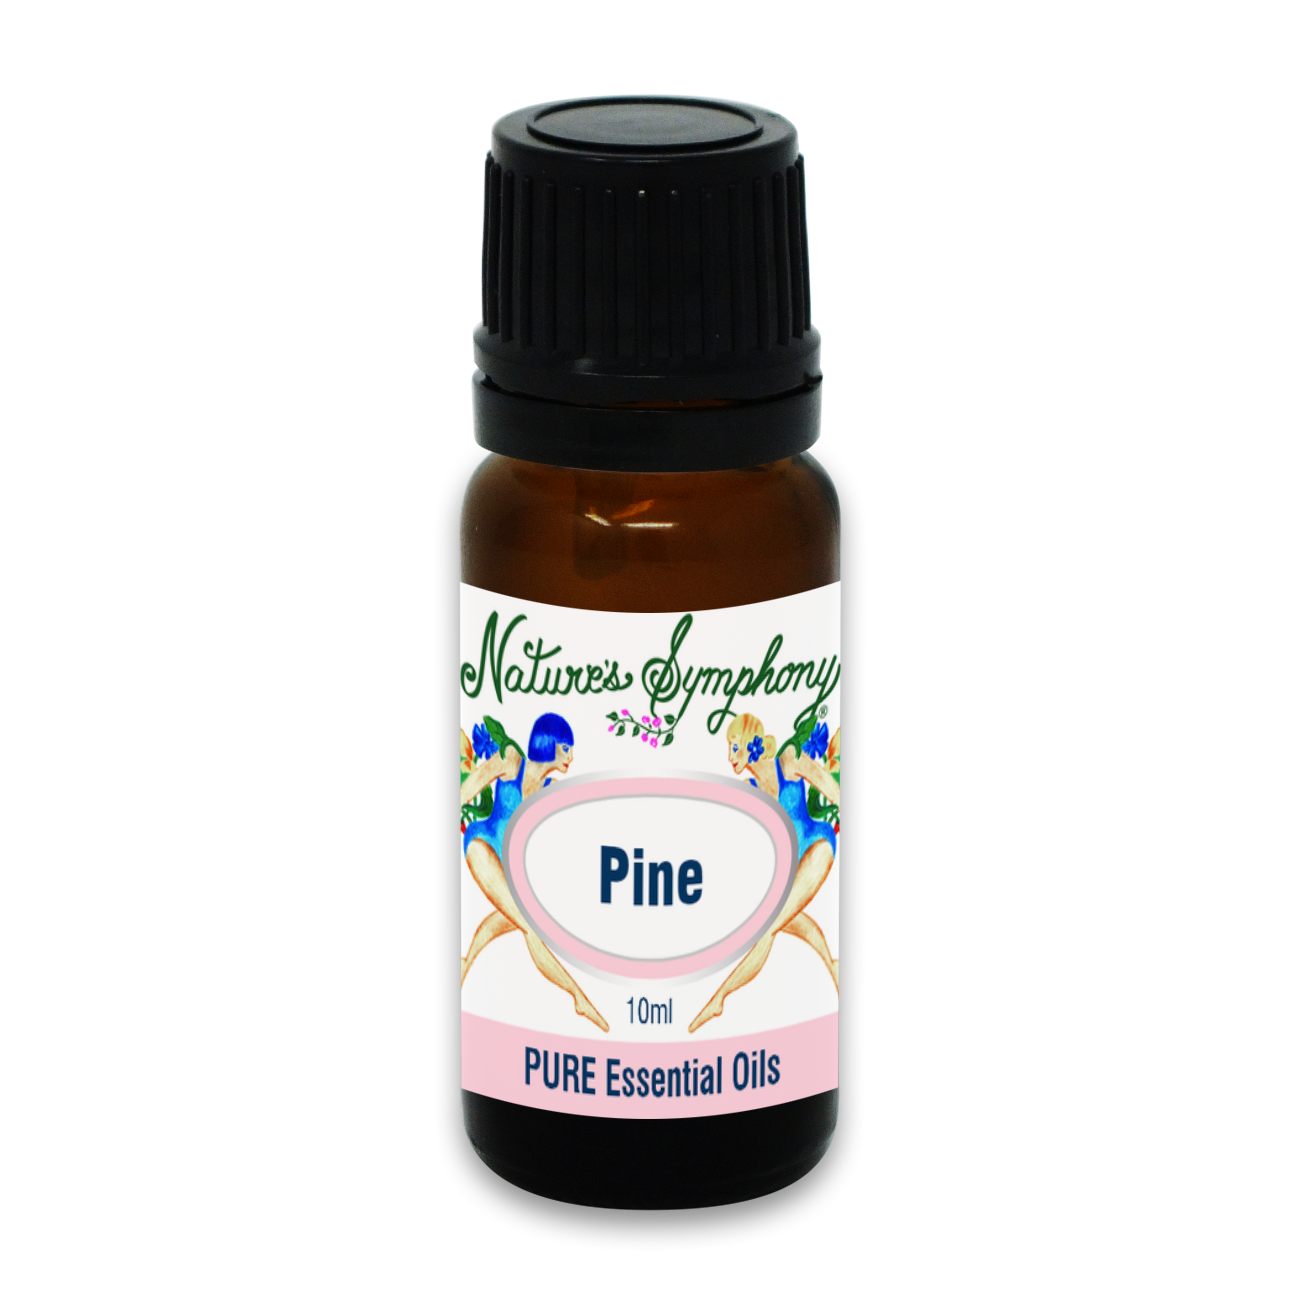 Pine, Ambiance Diffusion oil - 10ml